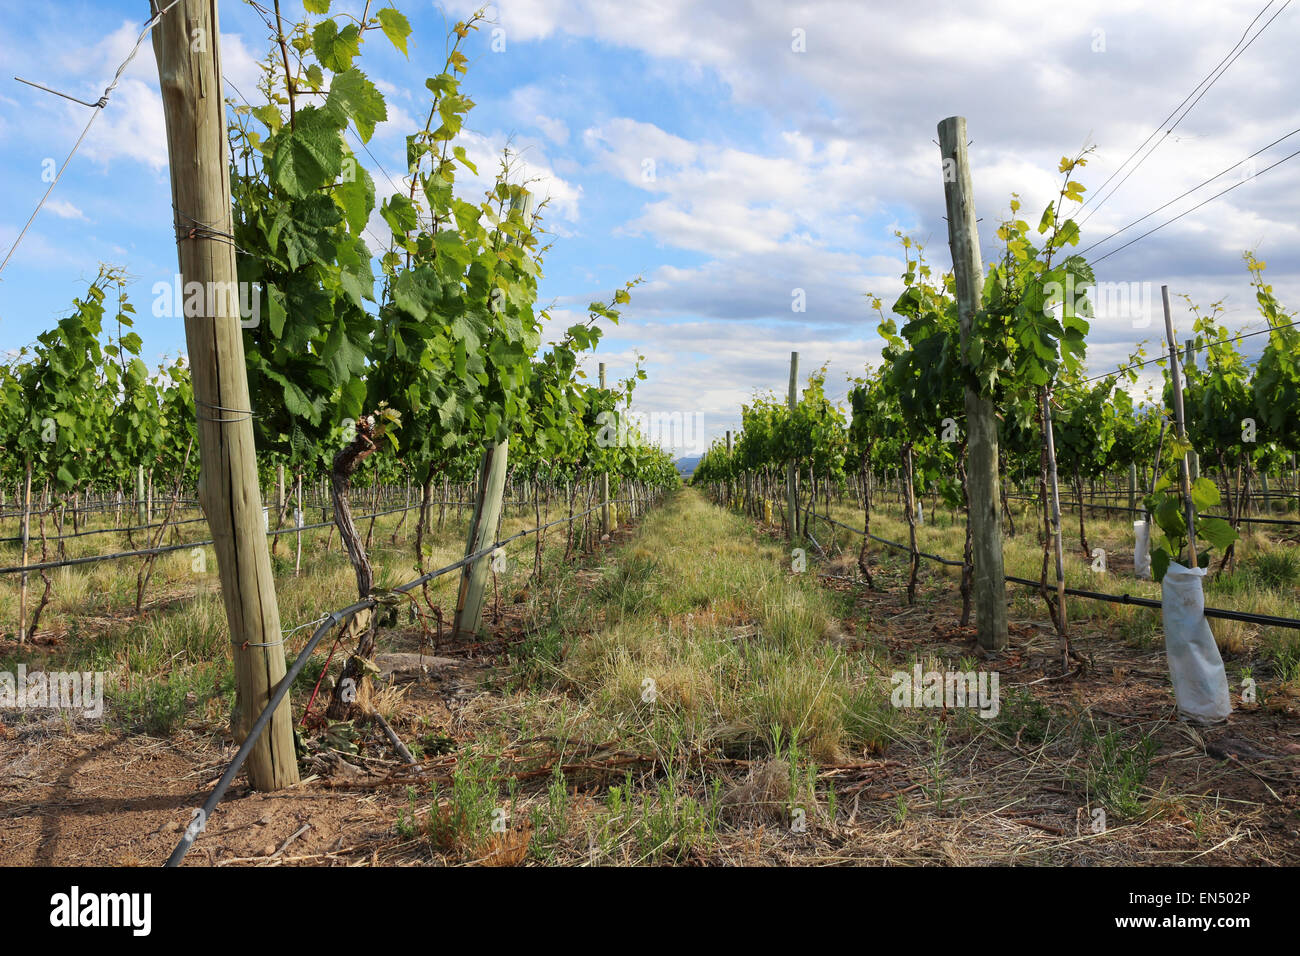 Vineyard in Uco Valley, Mendoza. Photography by Qin Xie. Stock Photo